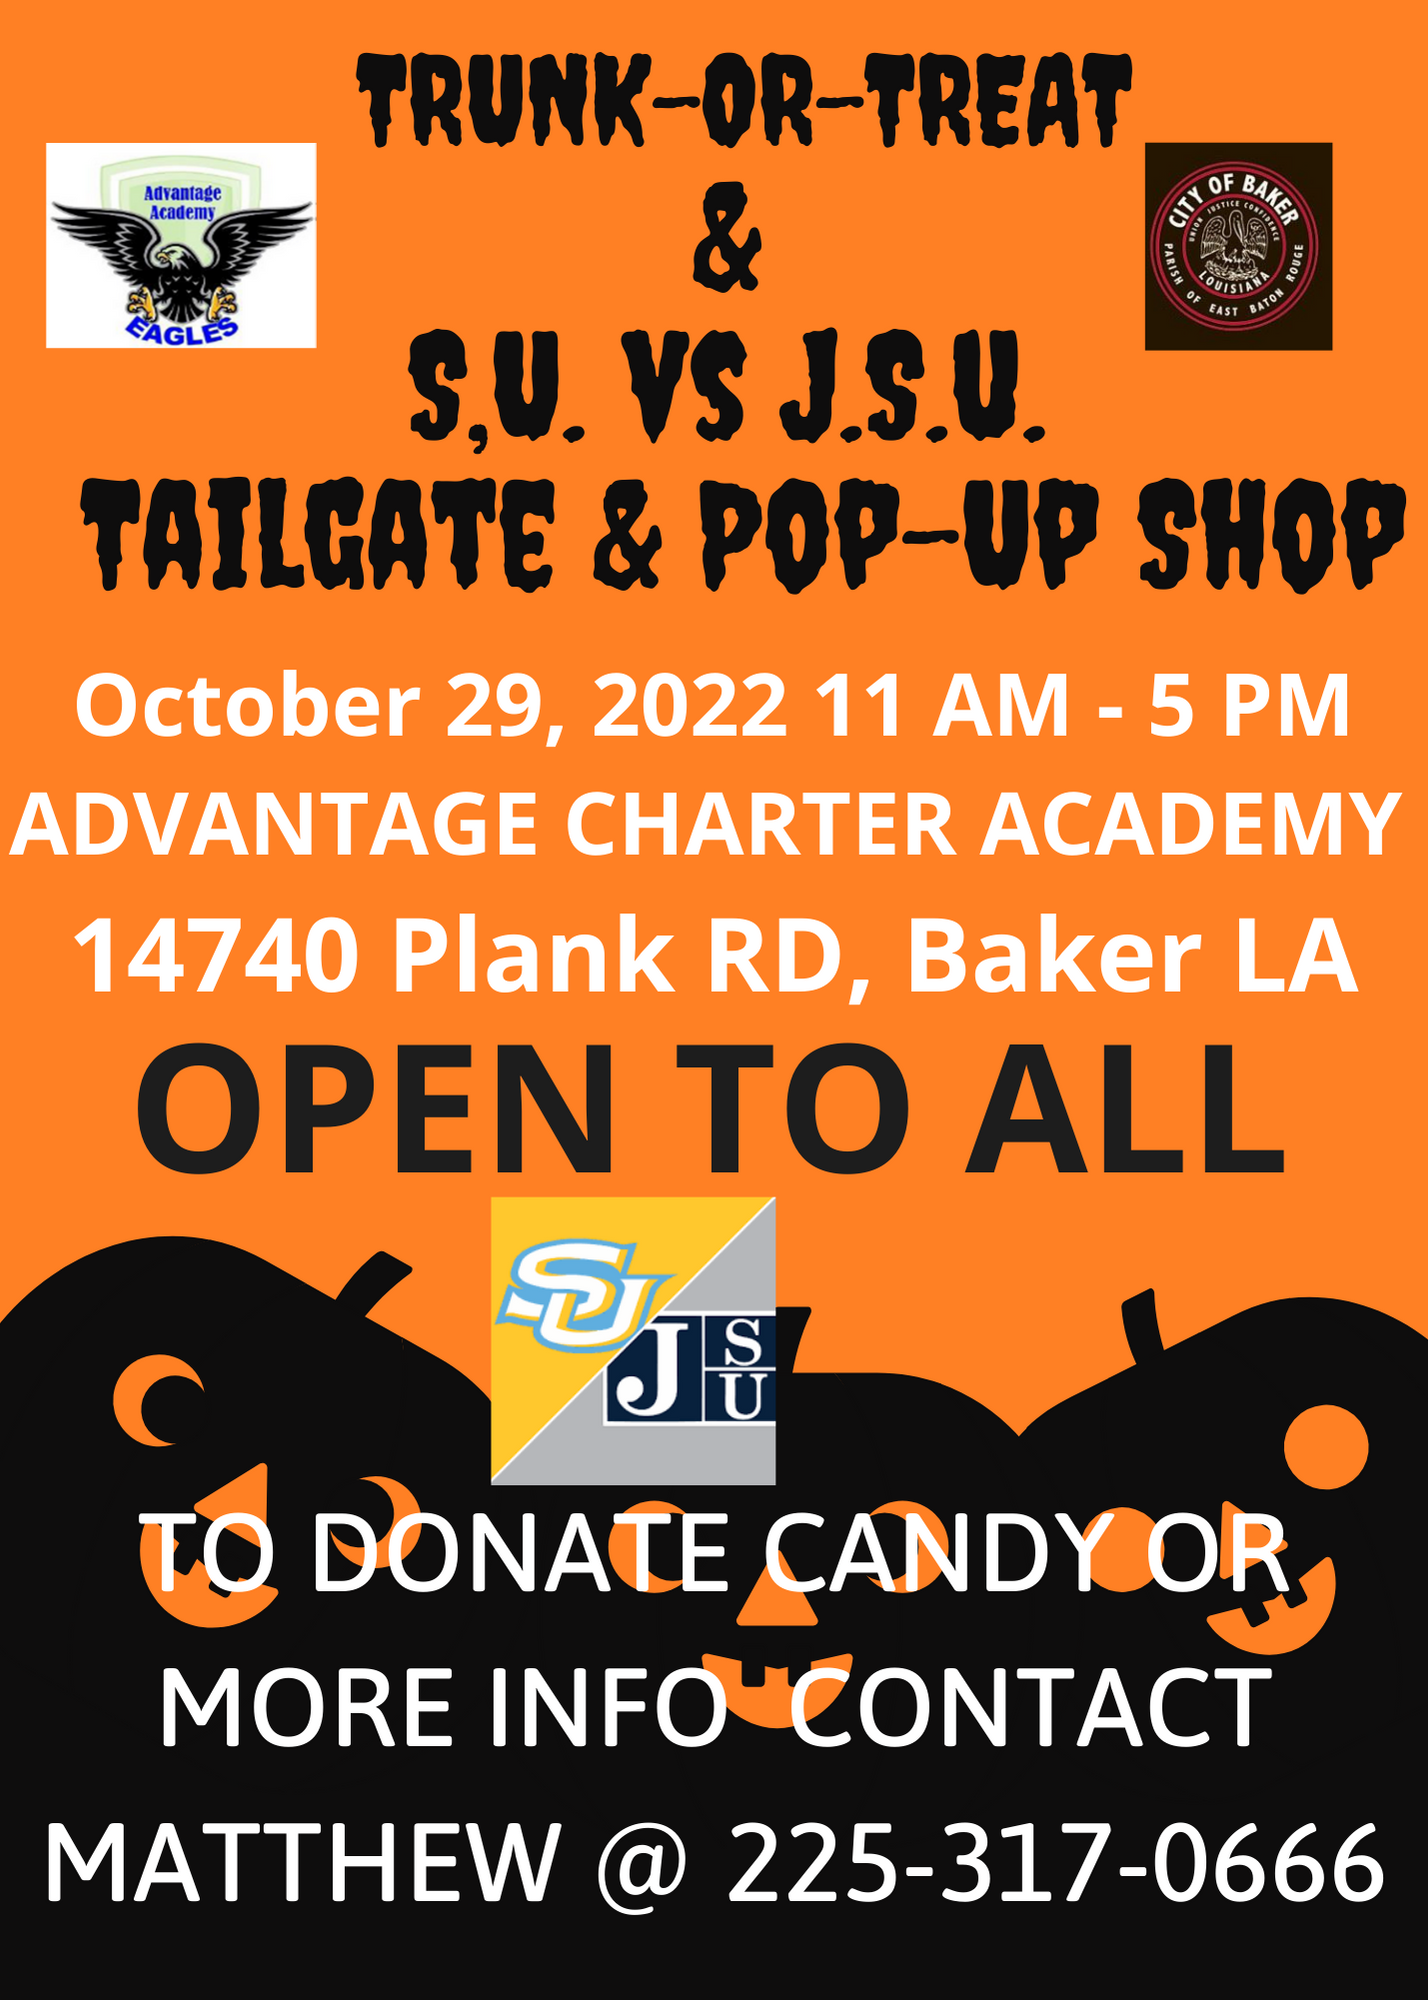 Advantage Charter Academy's Trunk or Treat is October 29, 2022! Details